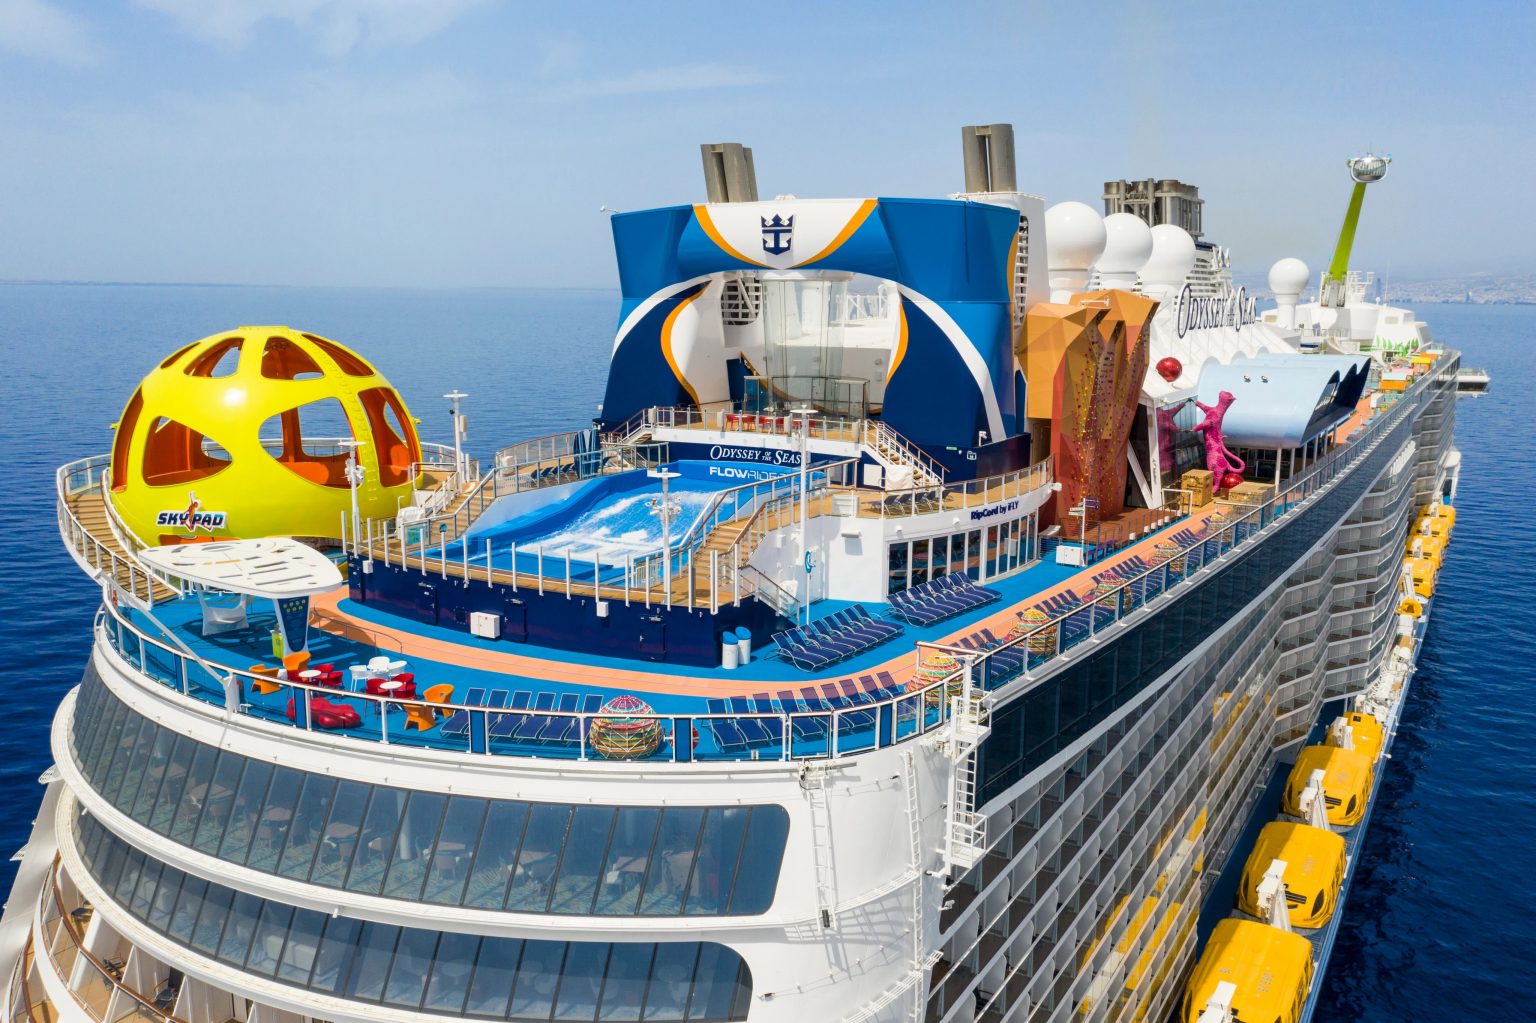 A Captain’s Inside Look at Odyssey of the Seas | Royal Caribbean Blog